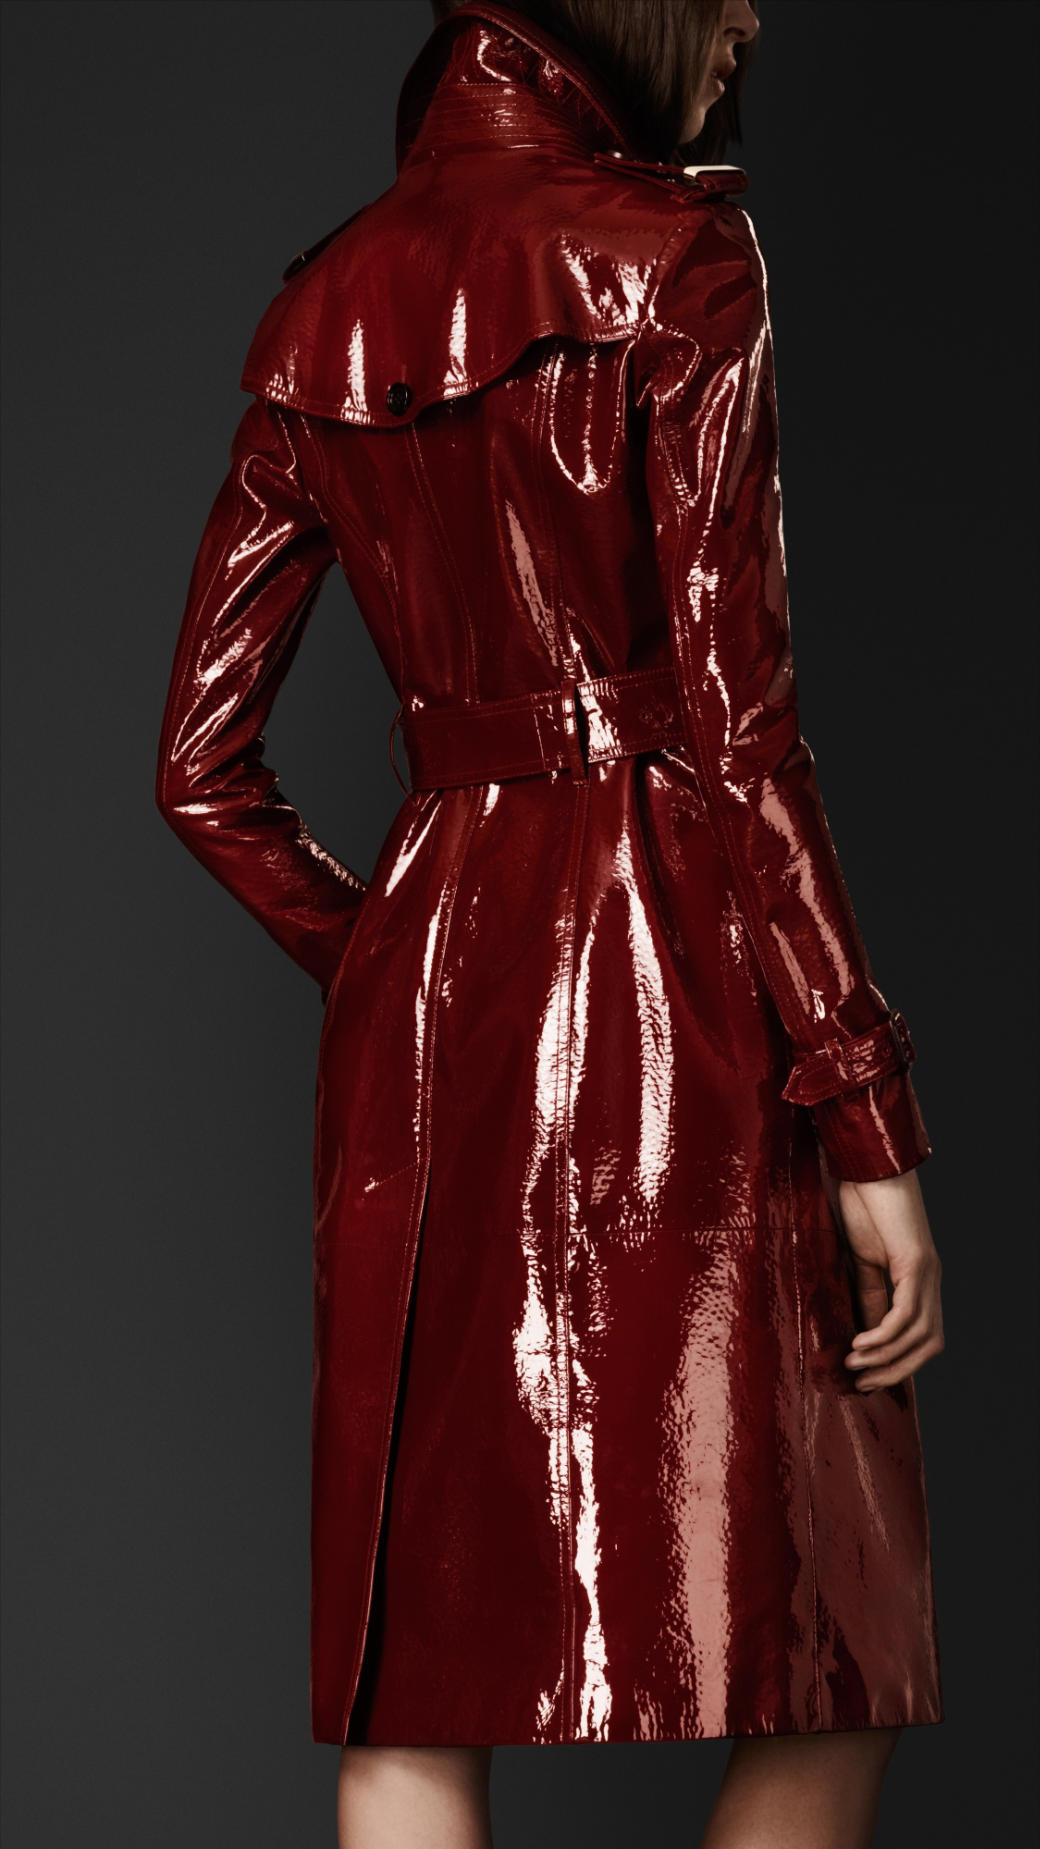 Lyst - Burberry Laminated Leather Trench Coat in Red